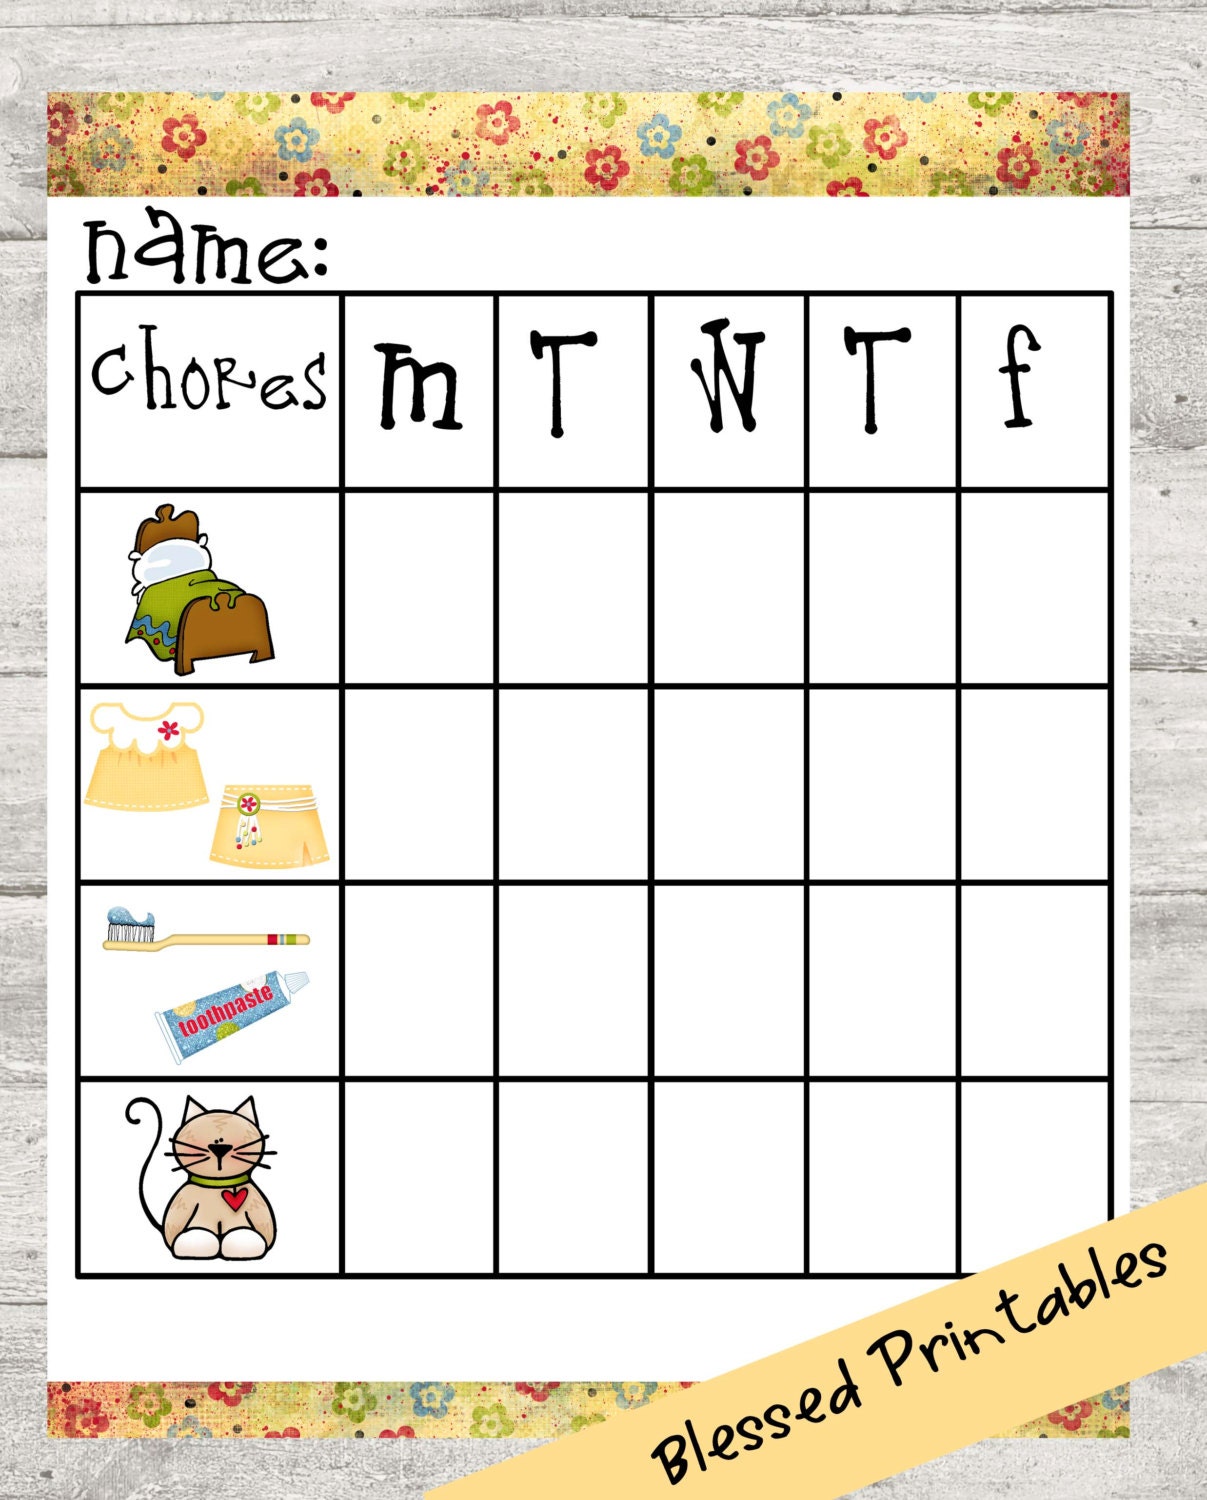 toddler-chore-chart-printable-by-soblesseddigitals-on-etsy